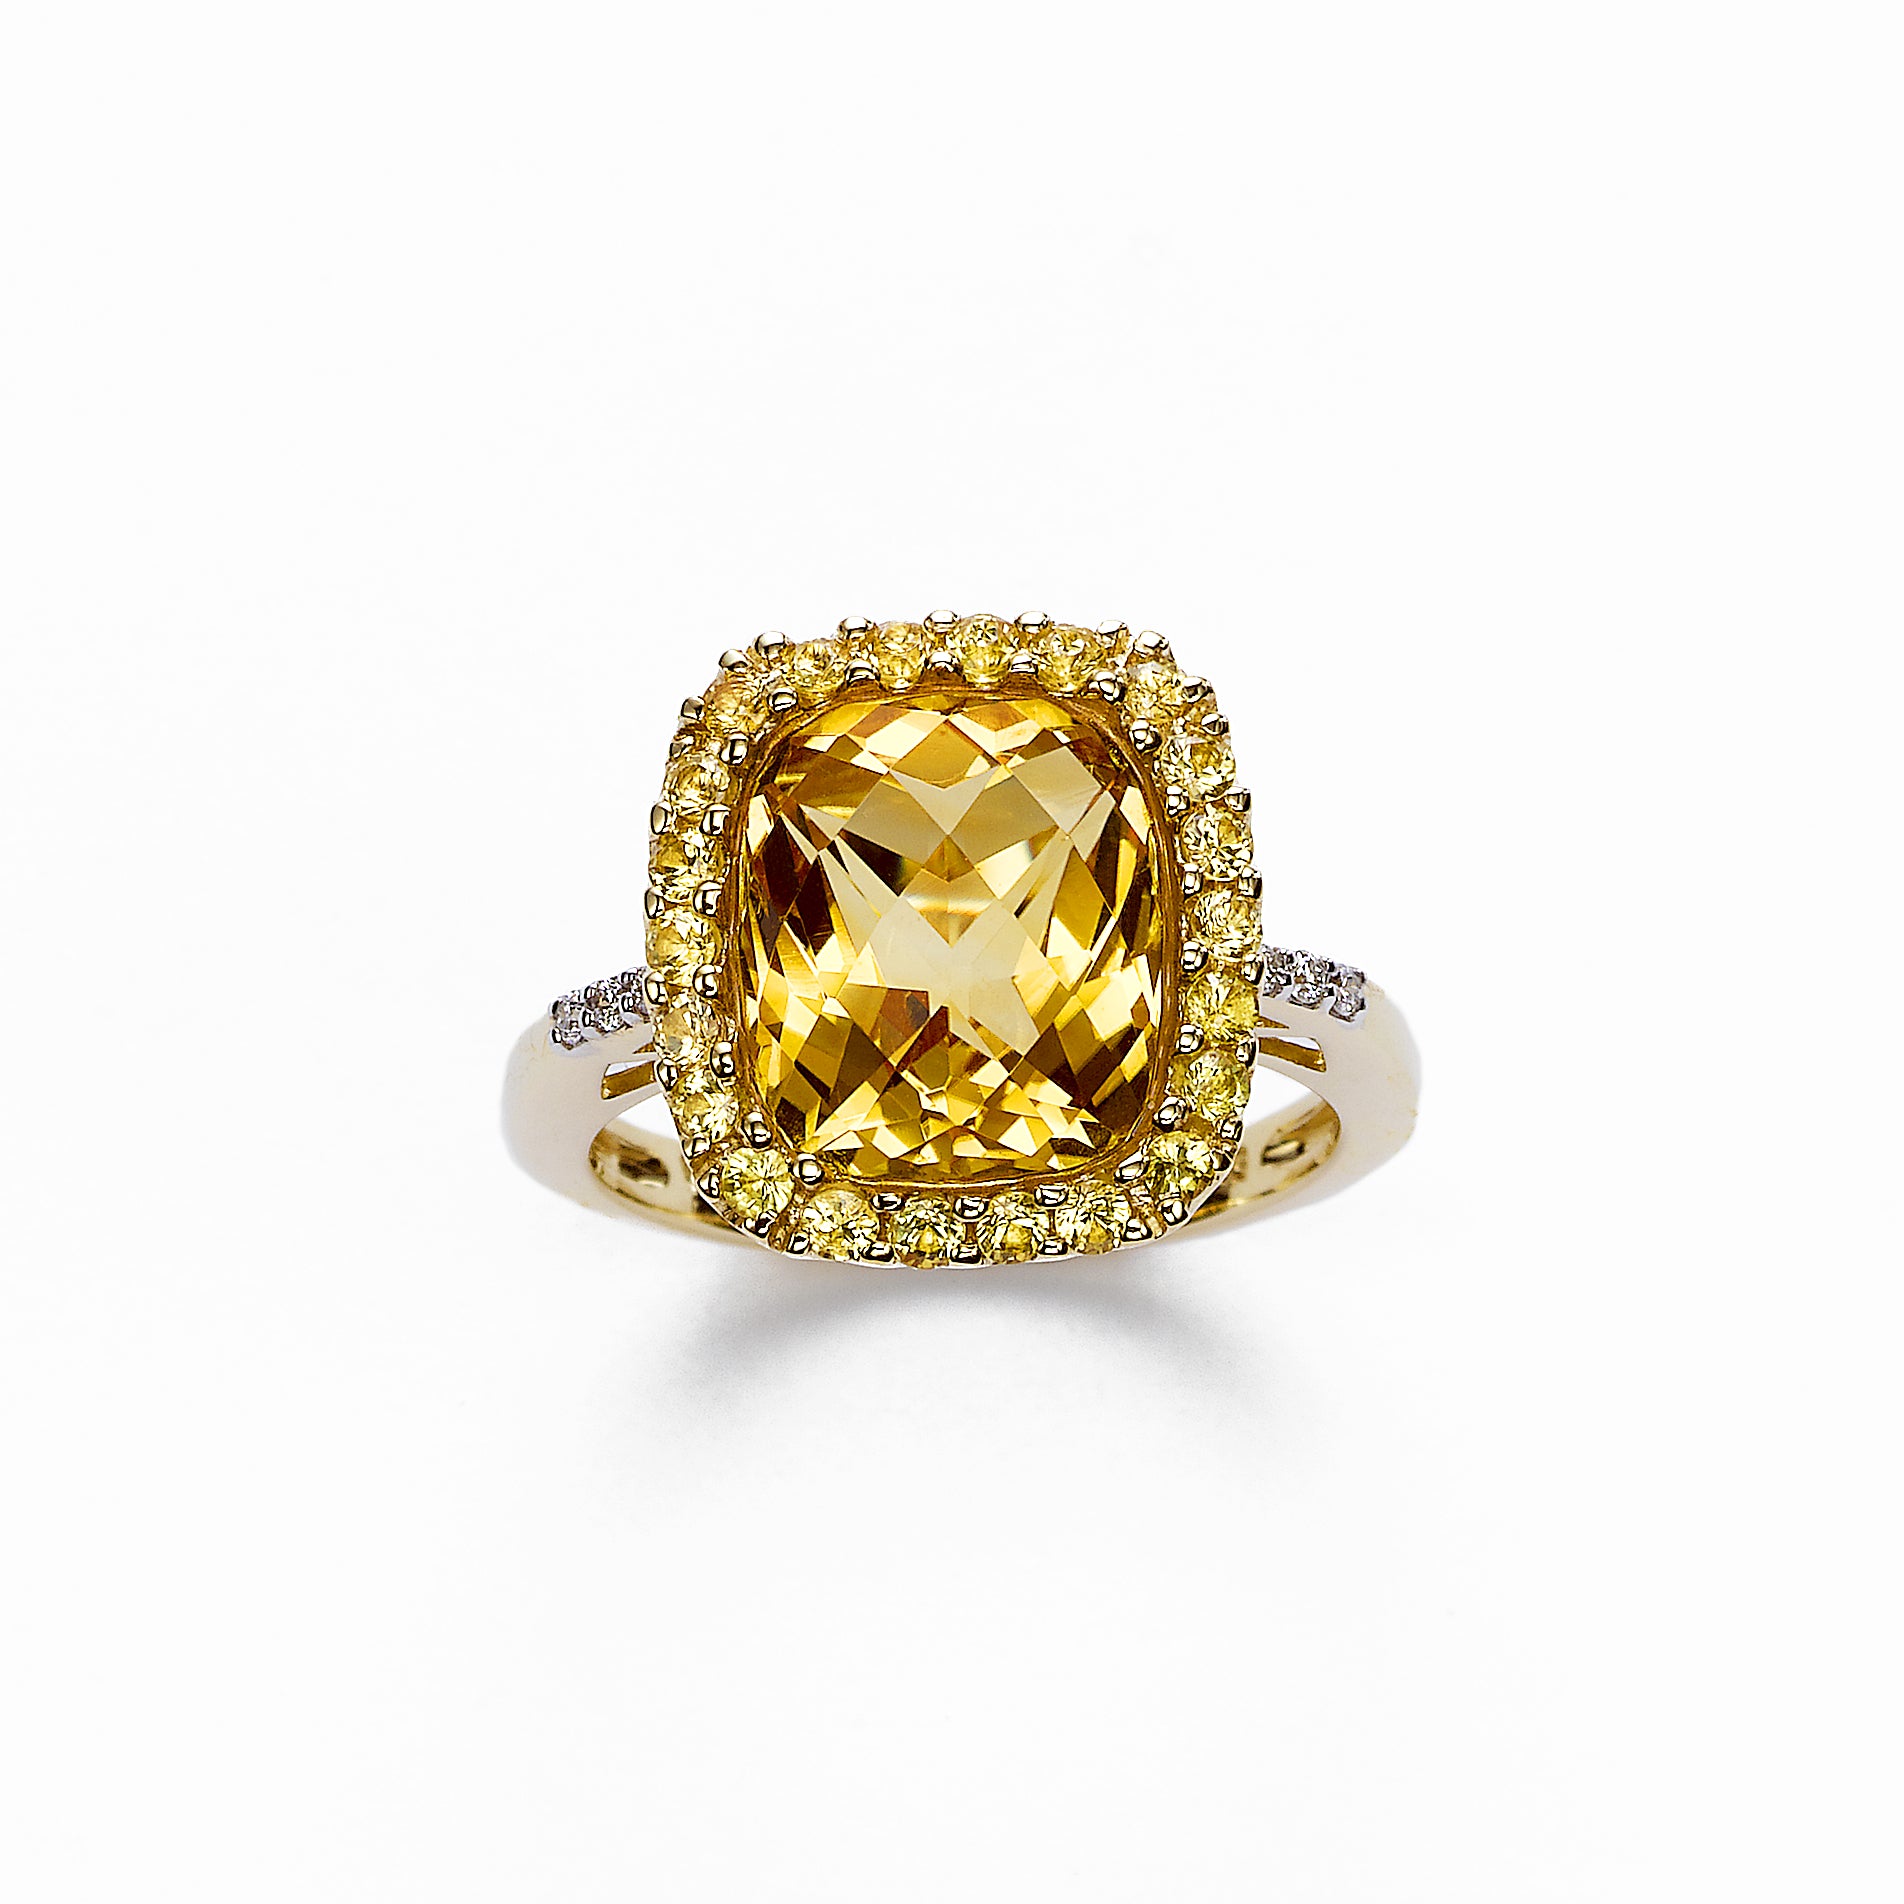 Silver Imperial Yellow Topaz Ring